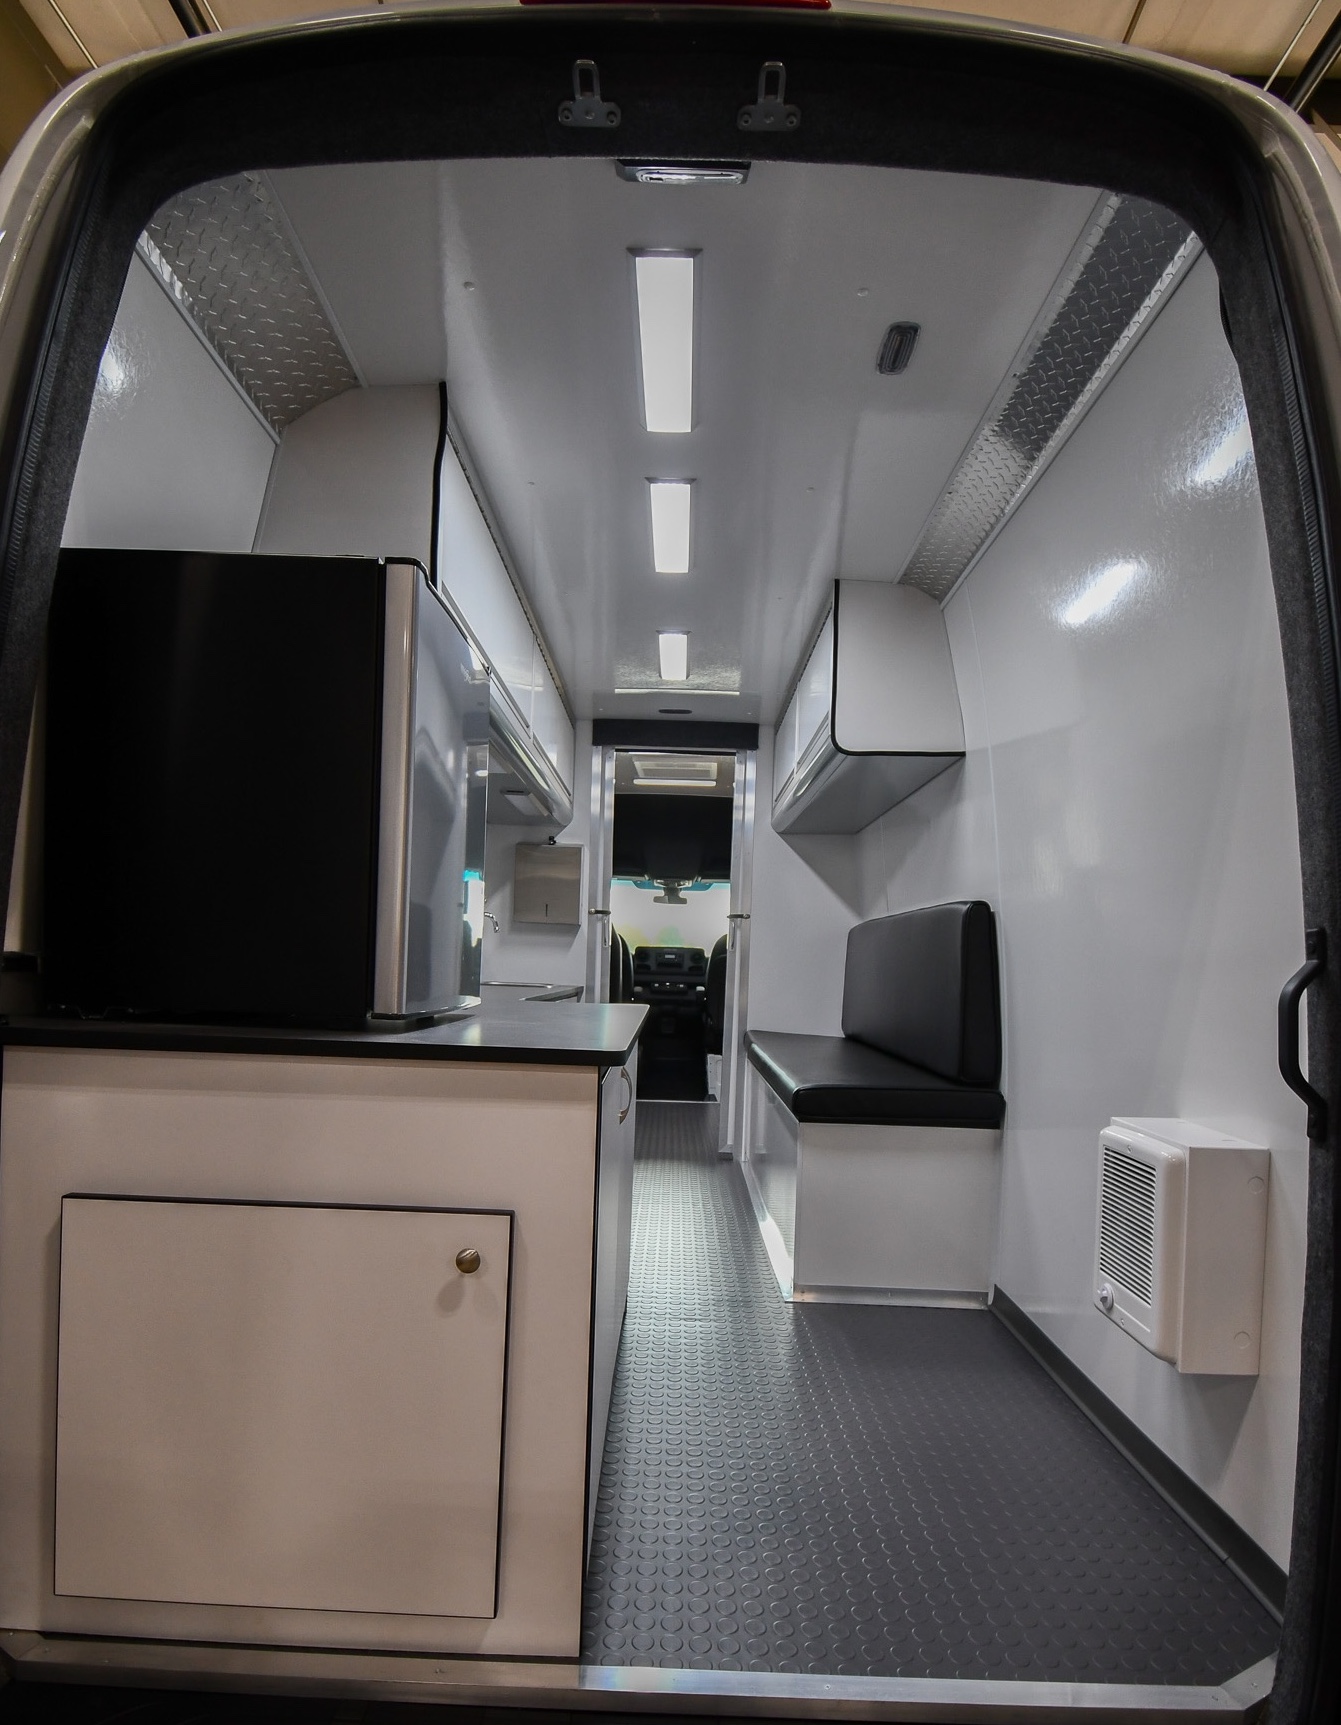 An interior view of the unit for Omaha, NE from the rear doors.